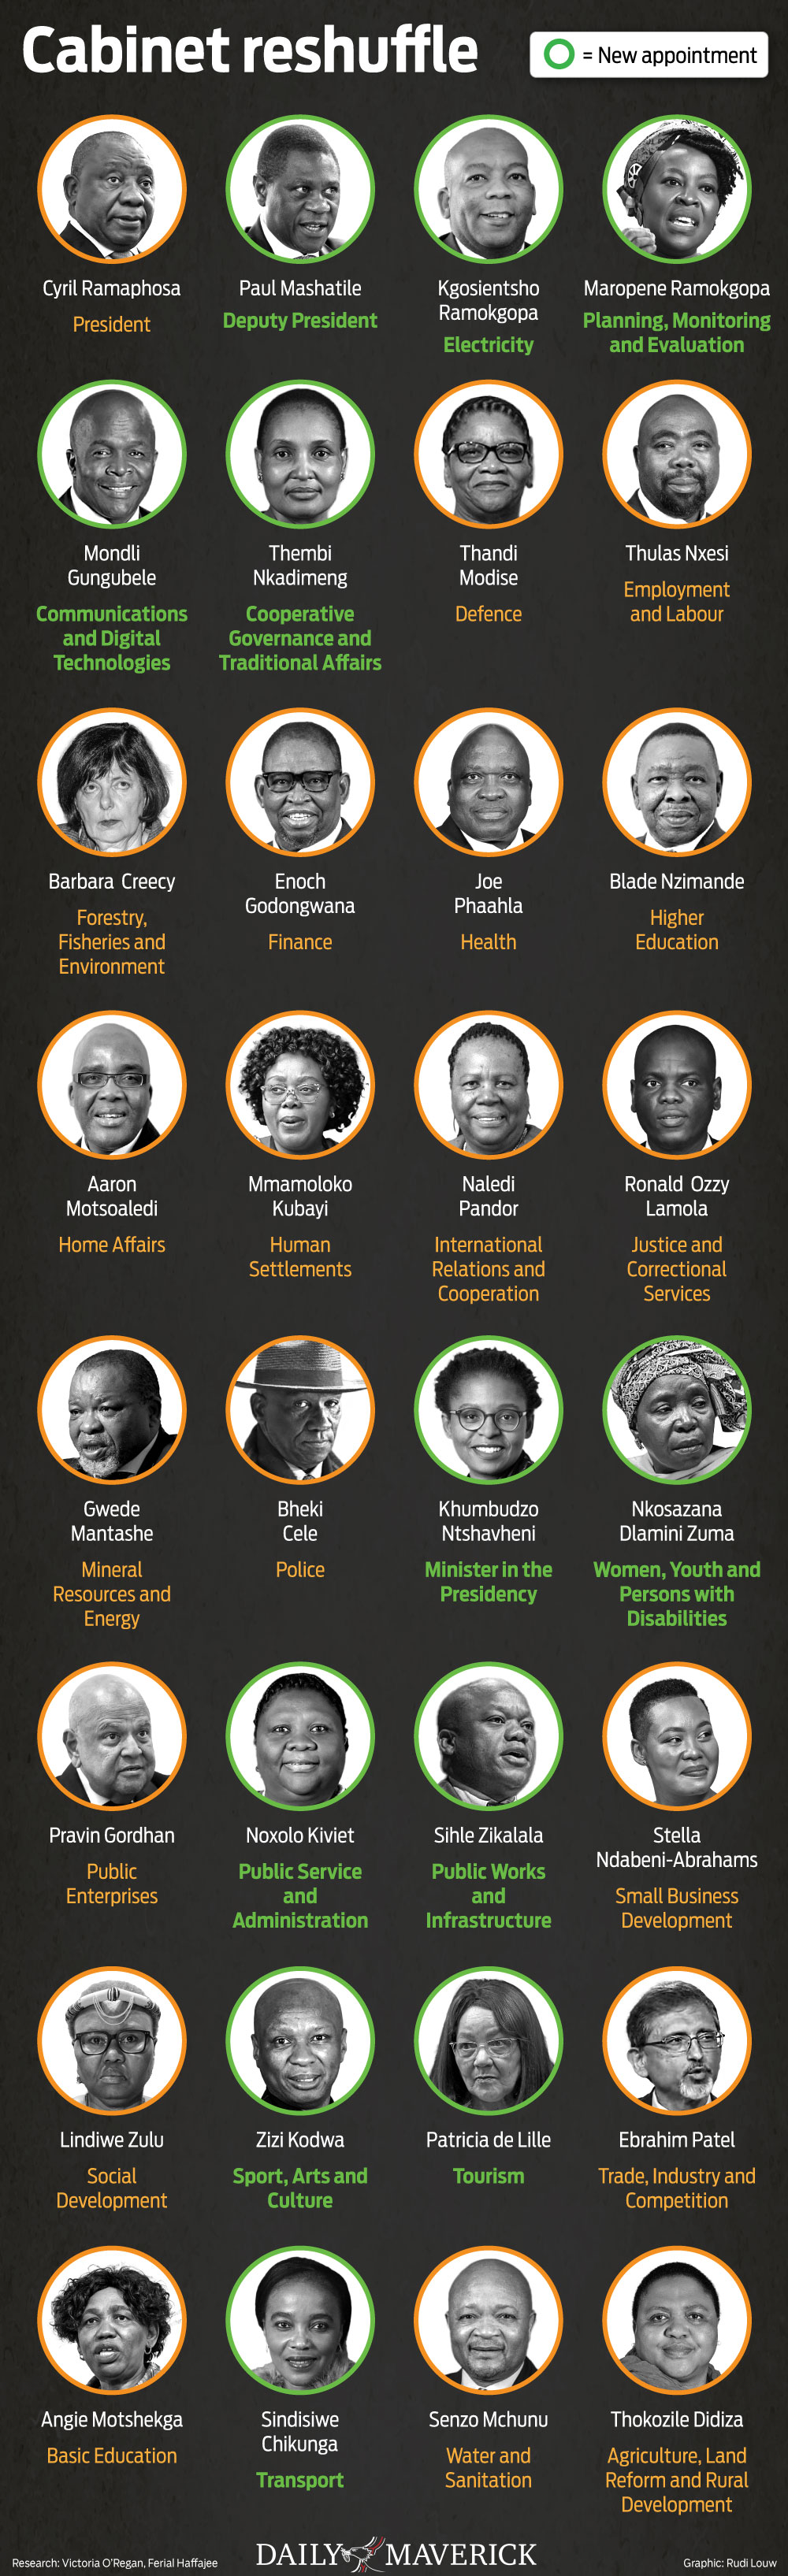 President Cyril Ramaphosa's new Cabinet announced on 6 March 2022